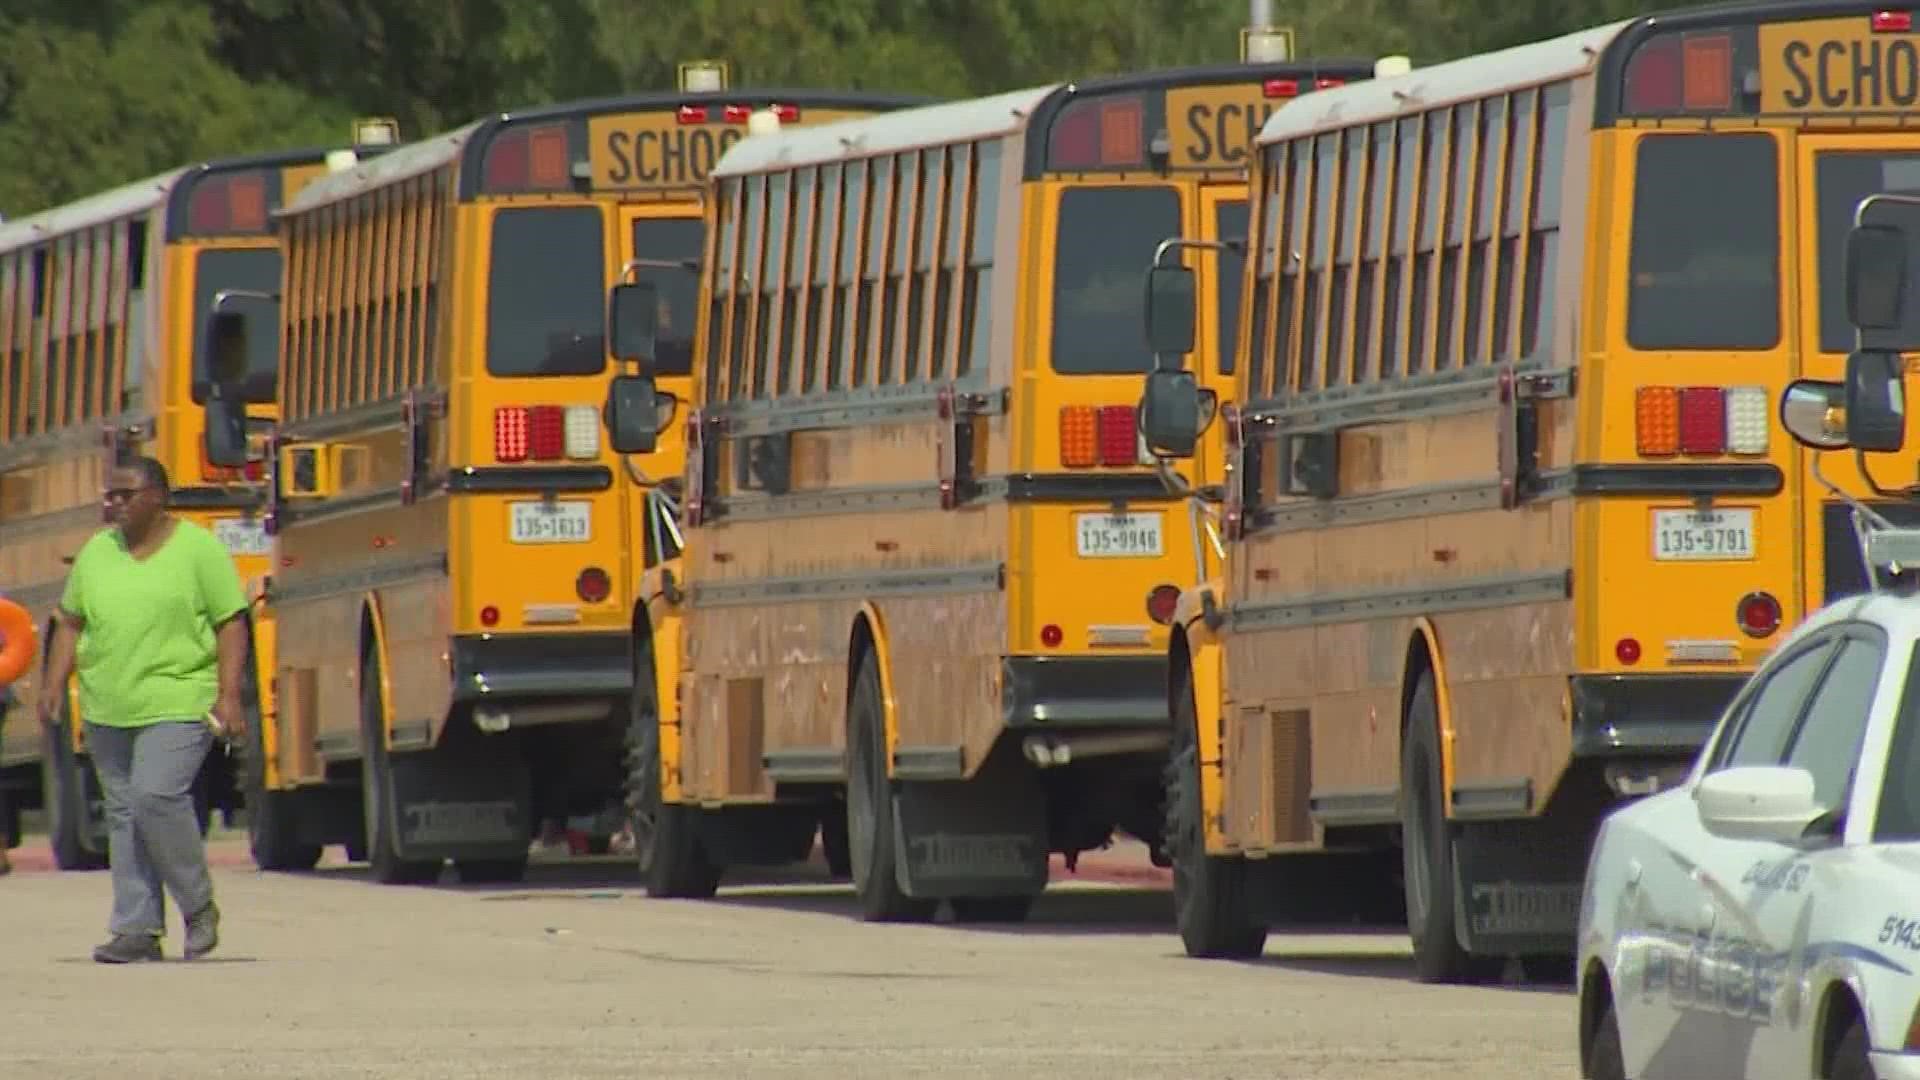 Several North Texas school districts closed due to surging COVID-19 cases and are getting ready to open after the three-day weekend.